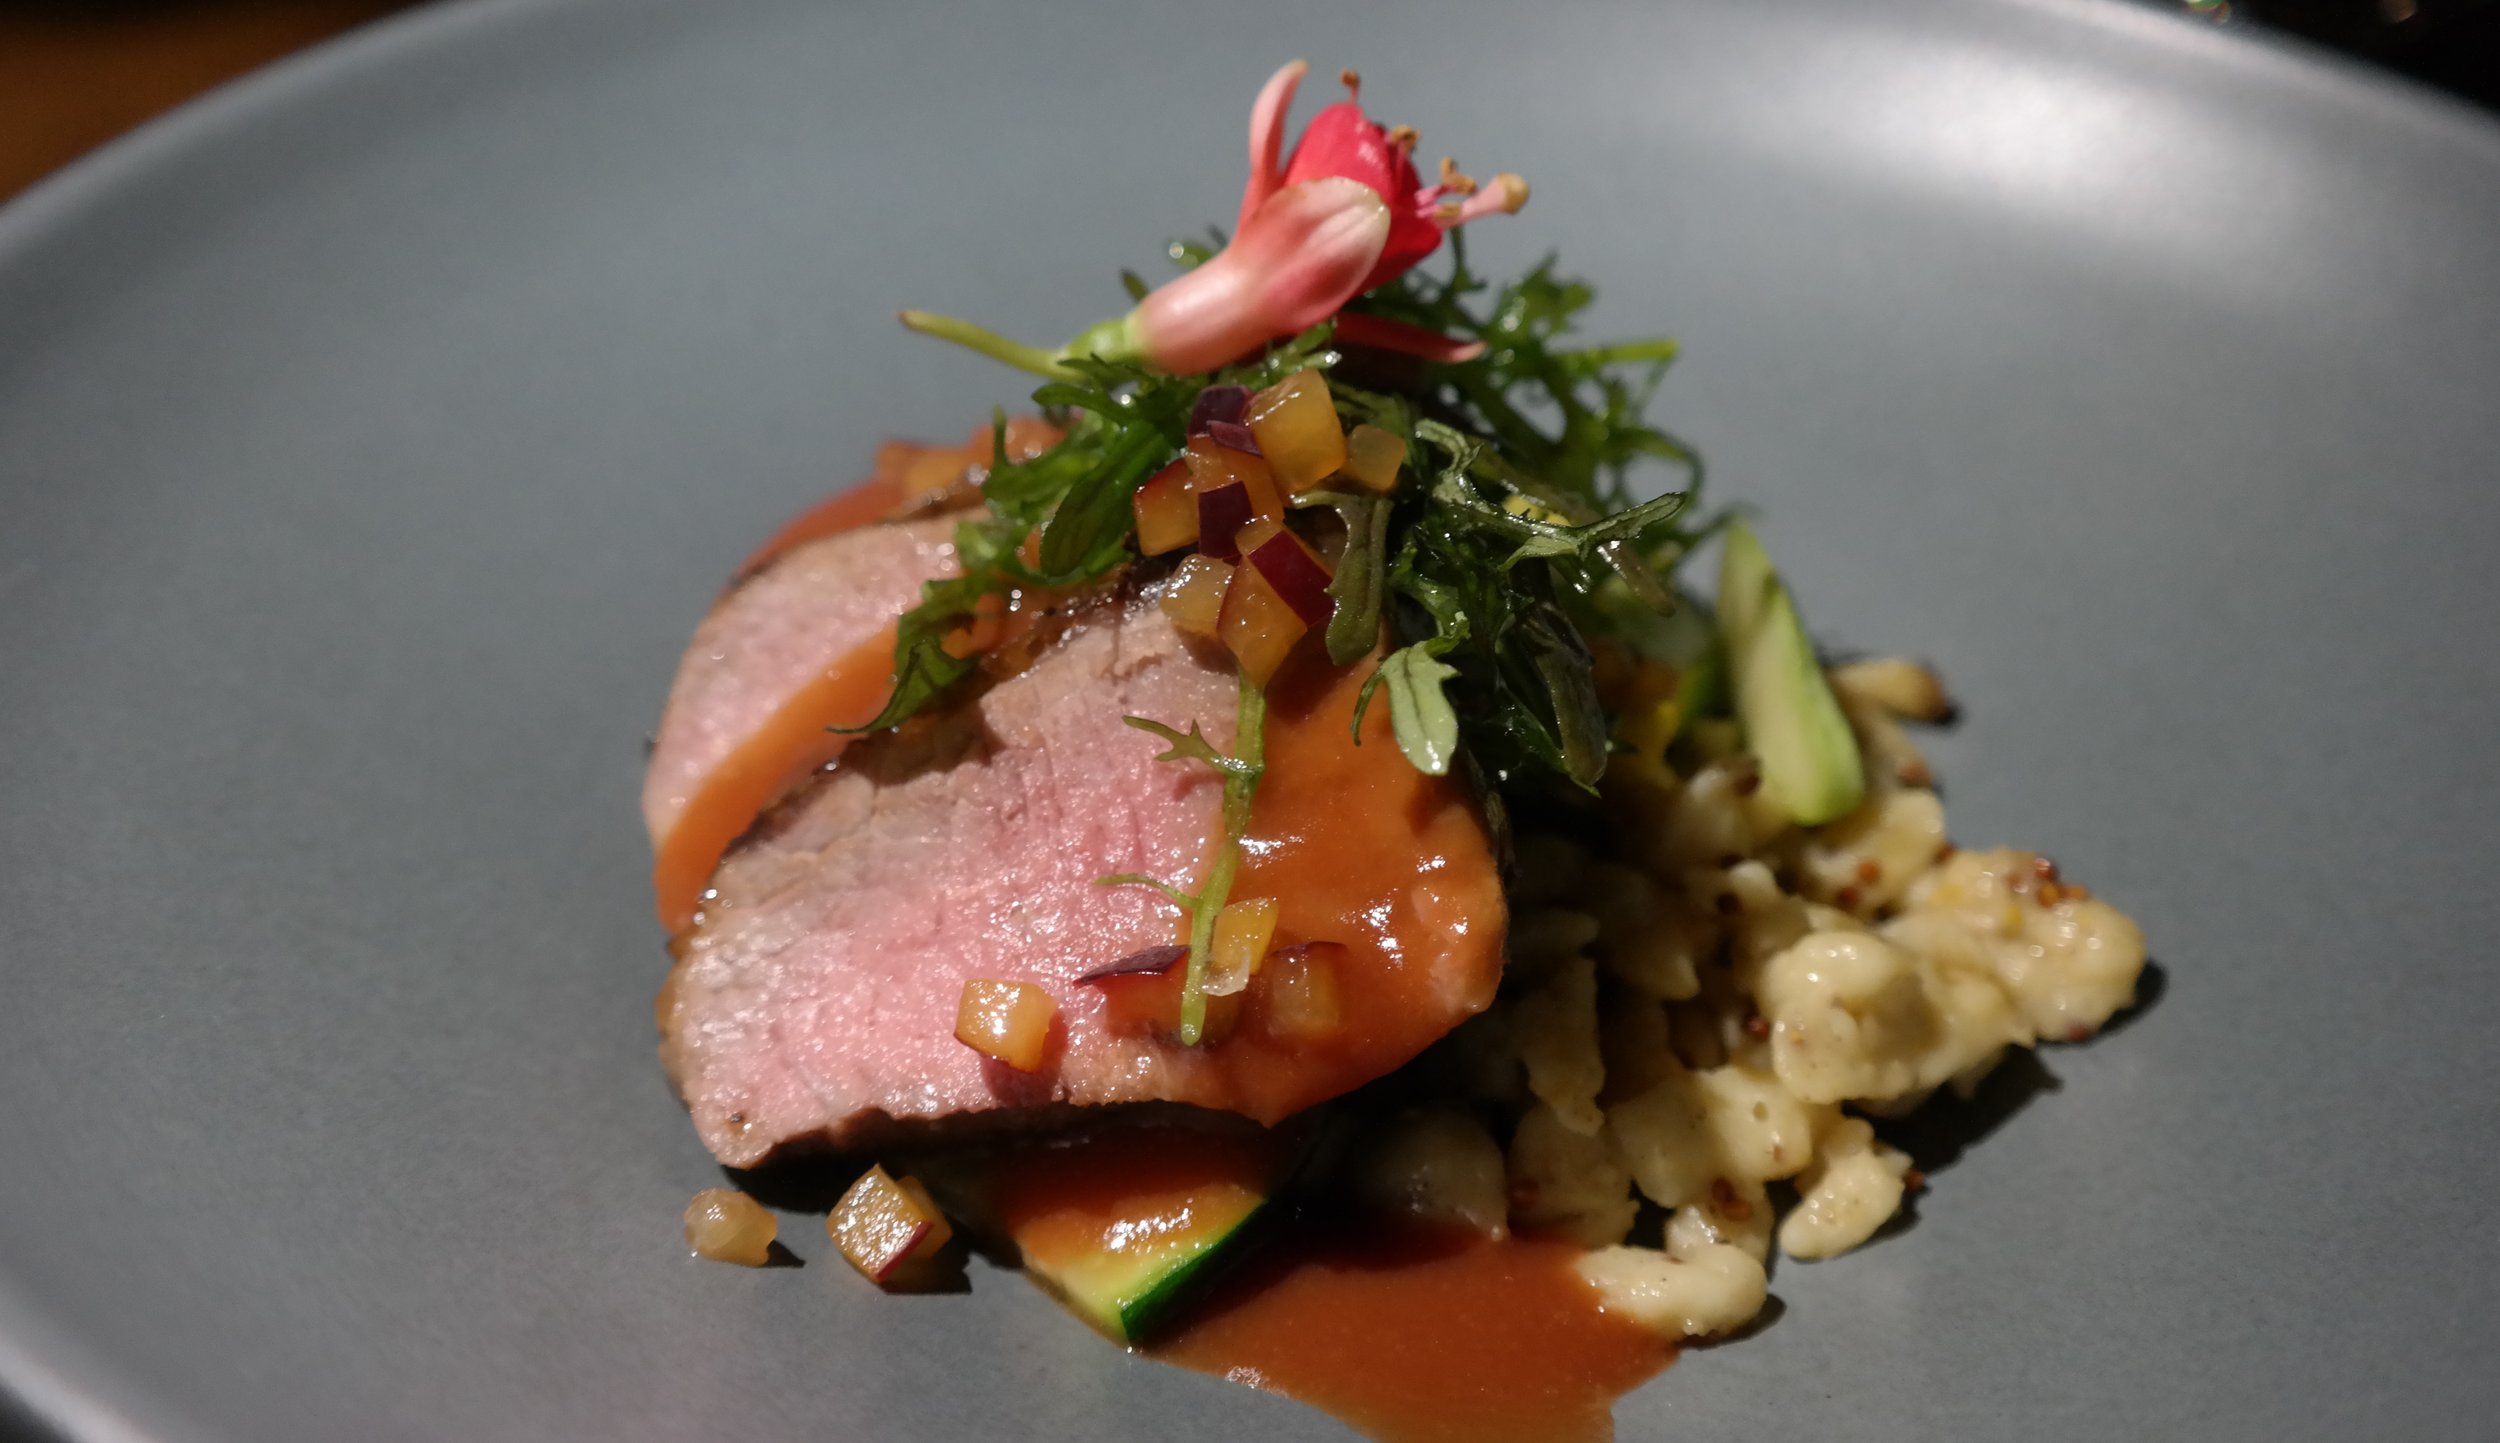 Chef Dale: Lamb Loin with Mustard Spaetzle, Mustard Microgreen Salad, and Plum Demi-Glace